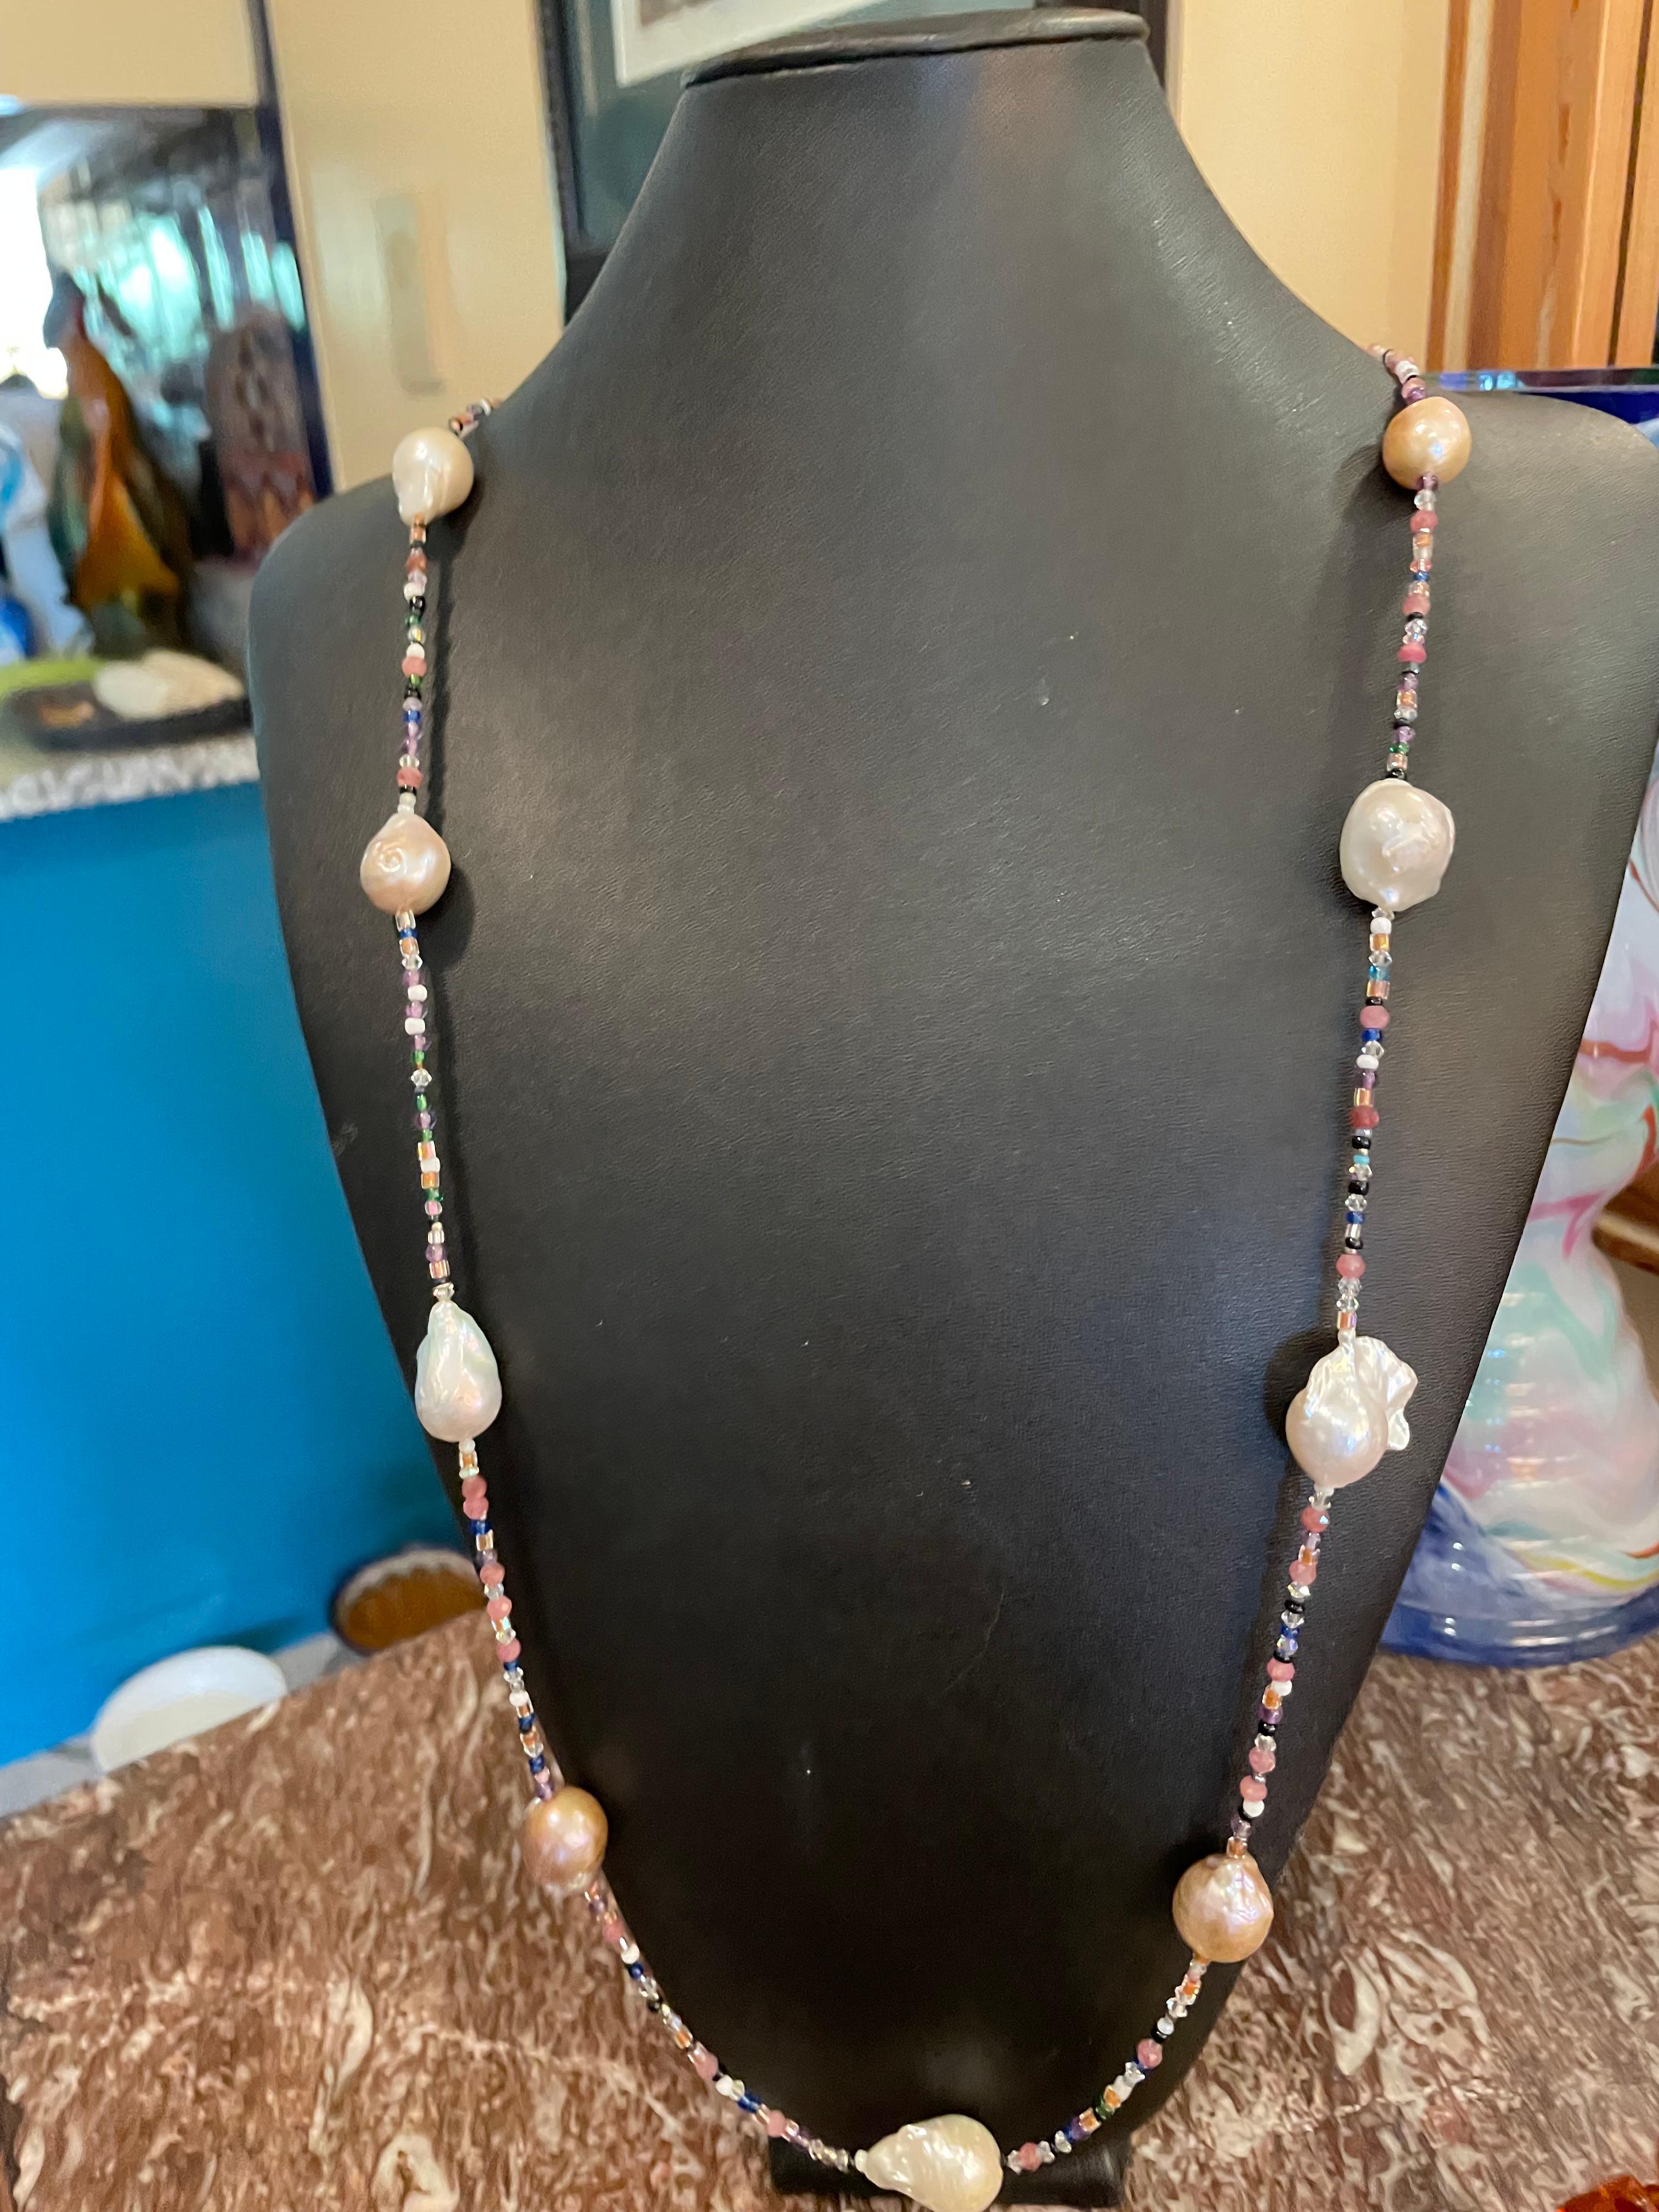 Lorraine’s Bijoux offers a luscious rope necklace of large white and blush freshwater Baroque Pearls. This wonderful long rope is perfect with any outfit from jeans and a Tee to a cocktail dress. The lovely tiny crystals are multi colored and add